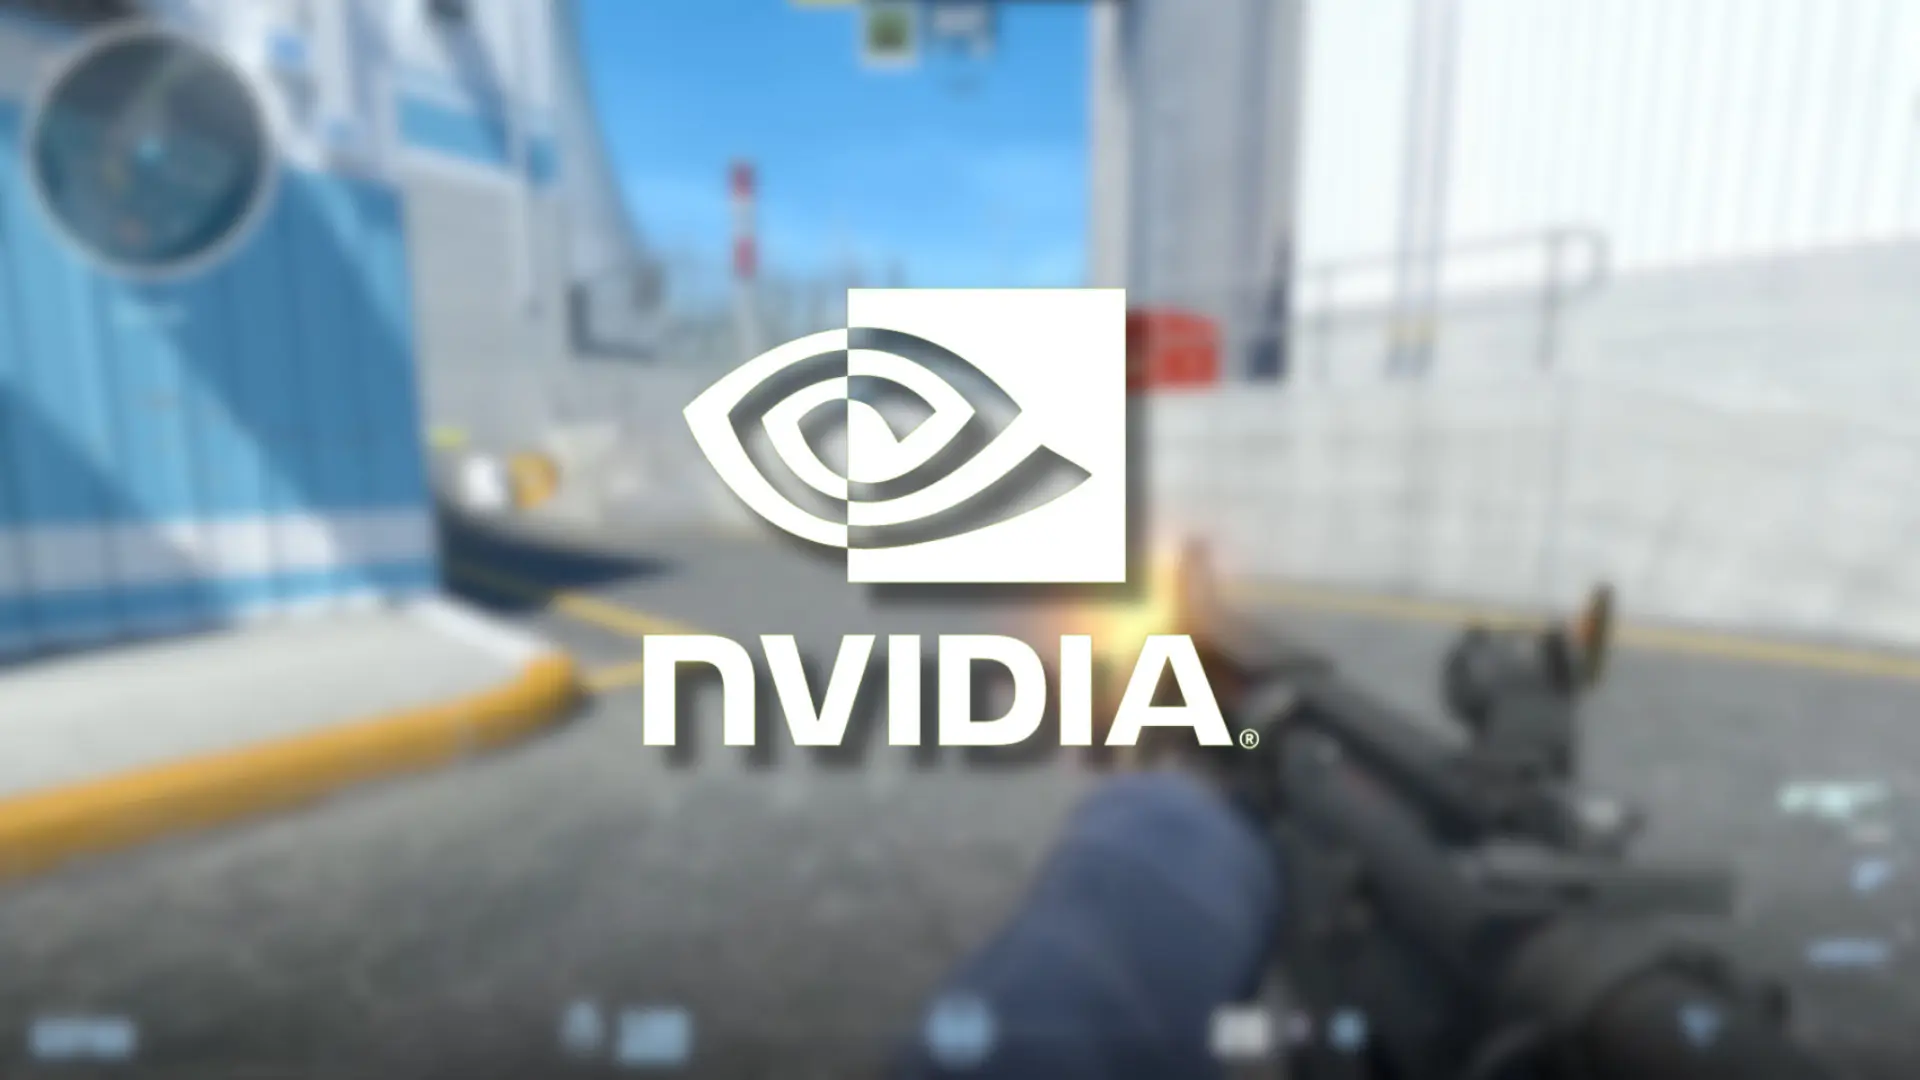 NVIDIA has worked with Valve to add NVIDIA Reflex to CS2